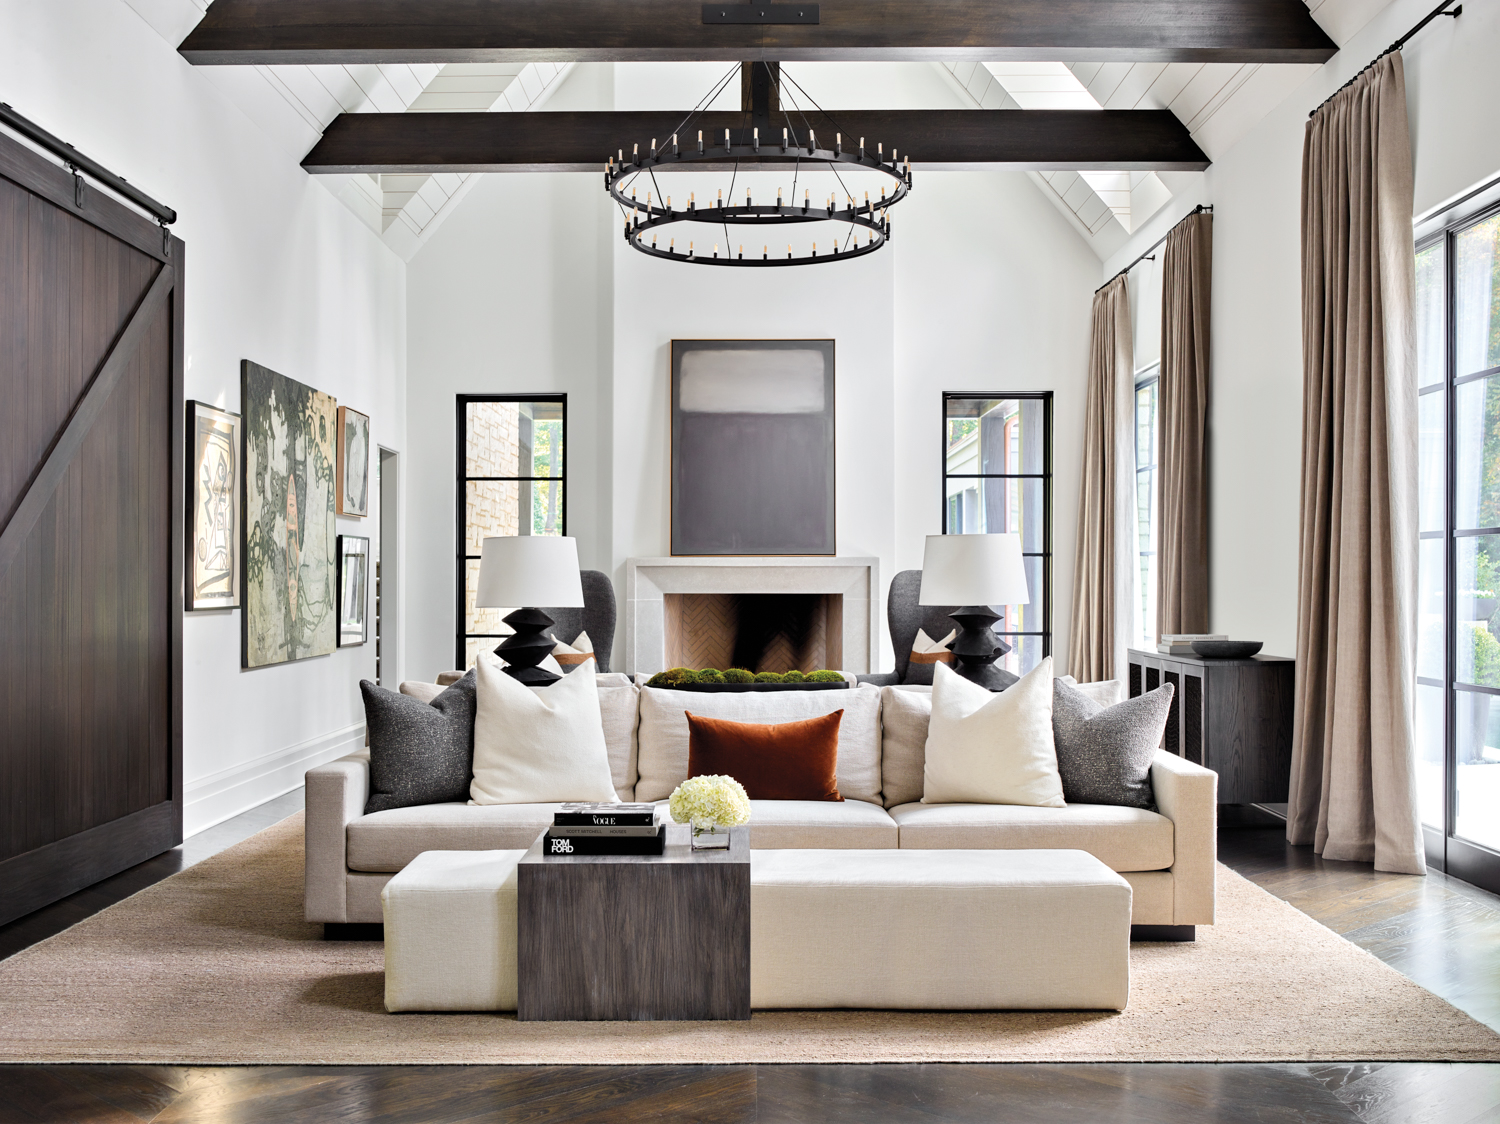 Vaulted family room with streamlined furniture, wooden ceiling beams and tiered chandelier